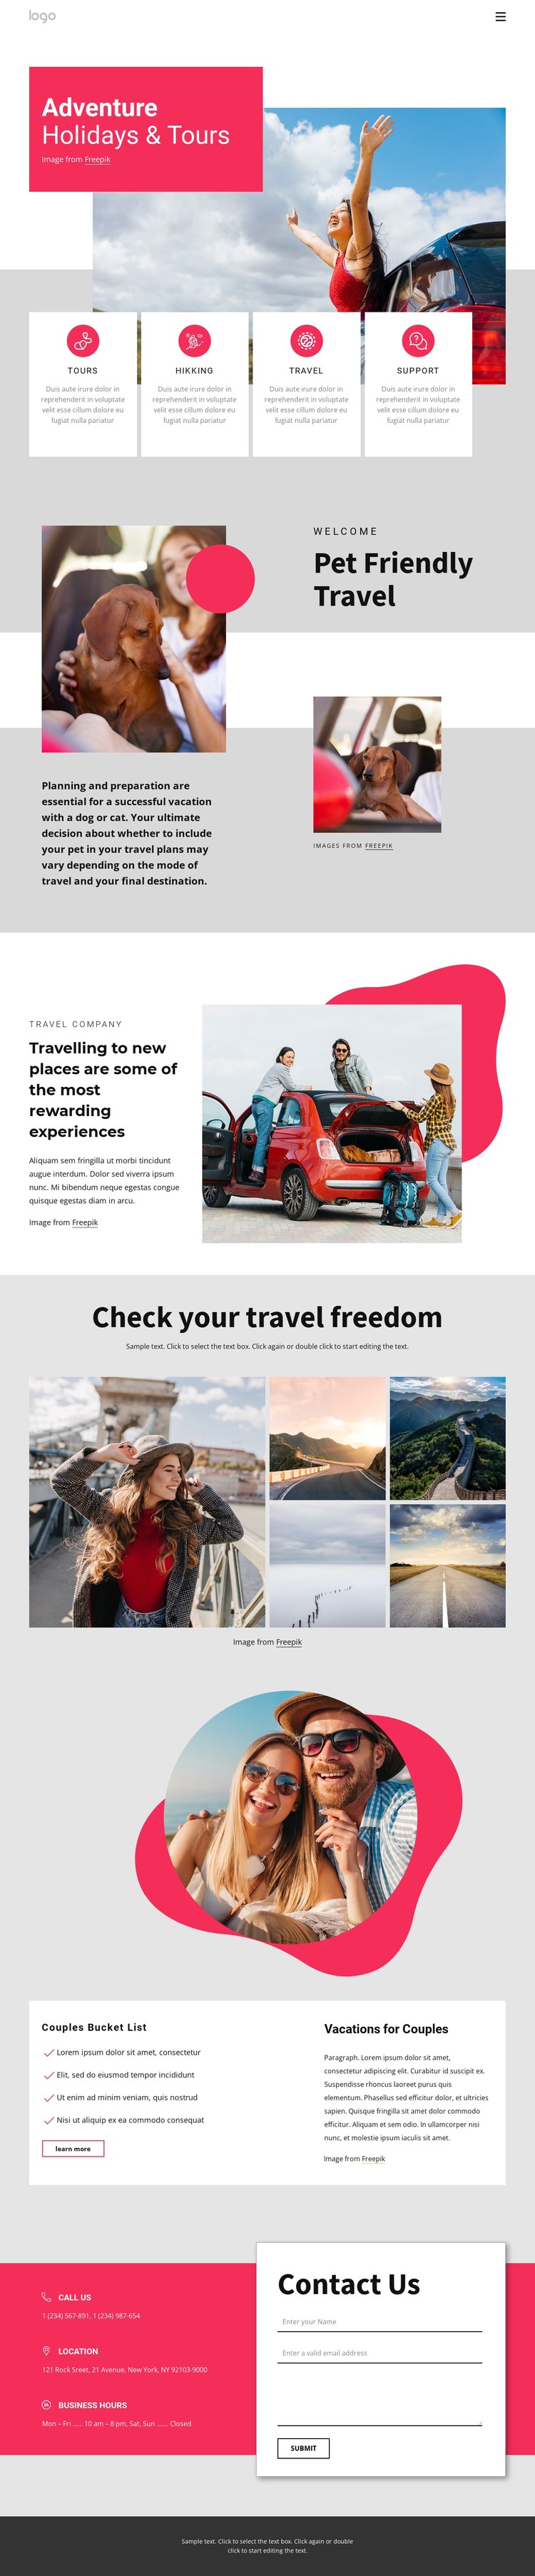 Adventure holidays and tours CSS Template